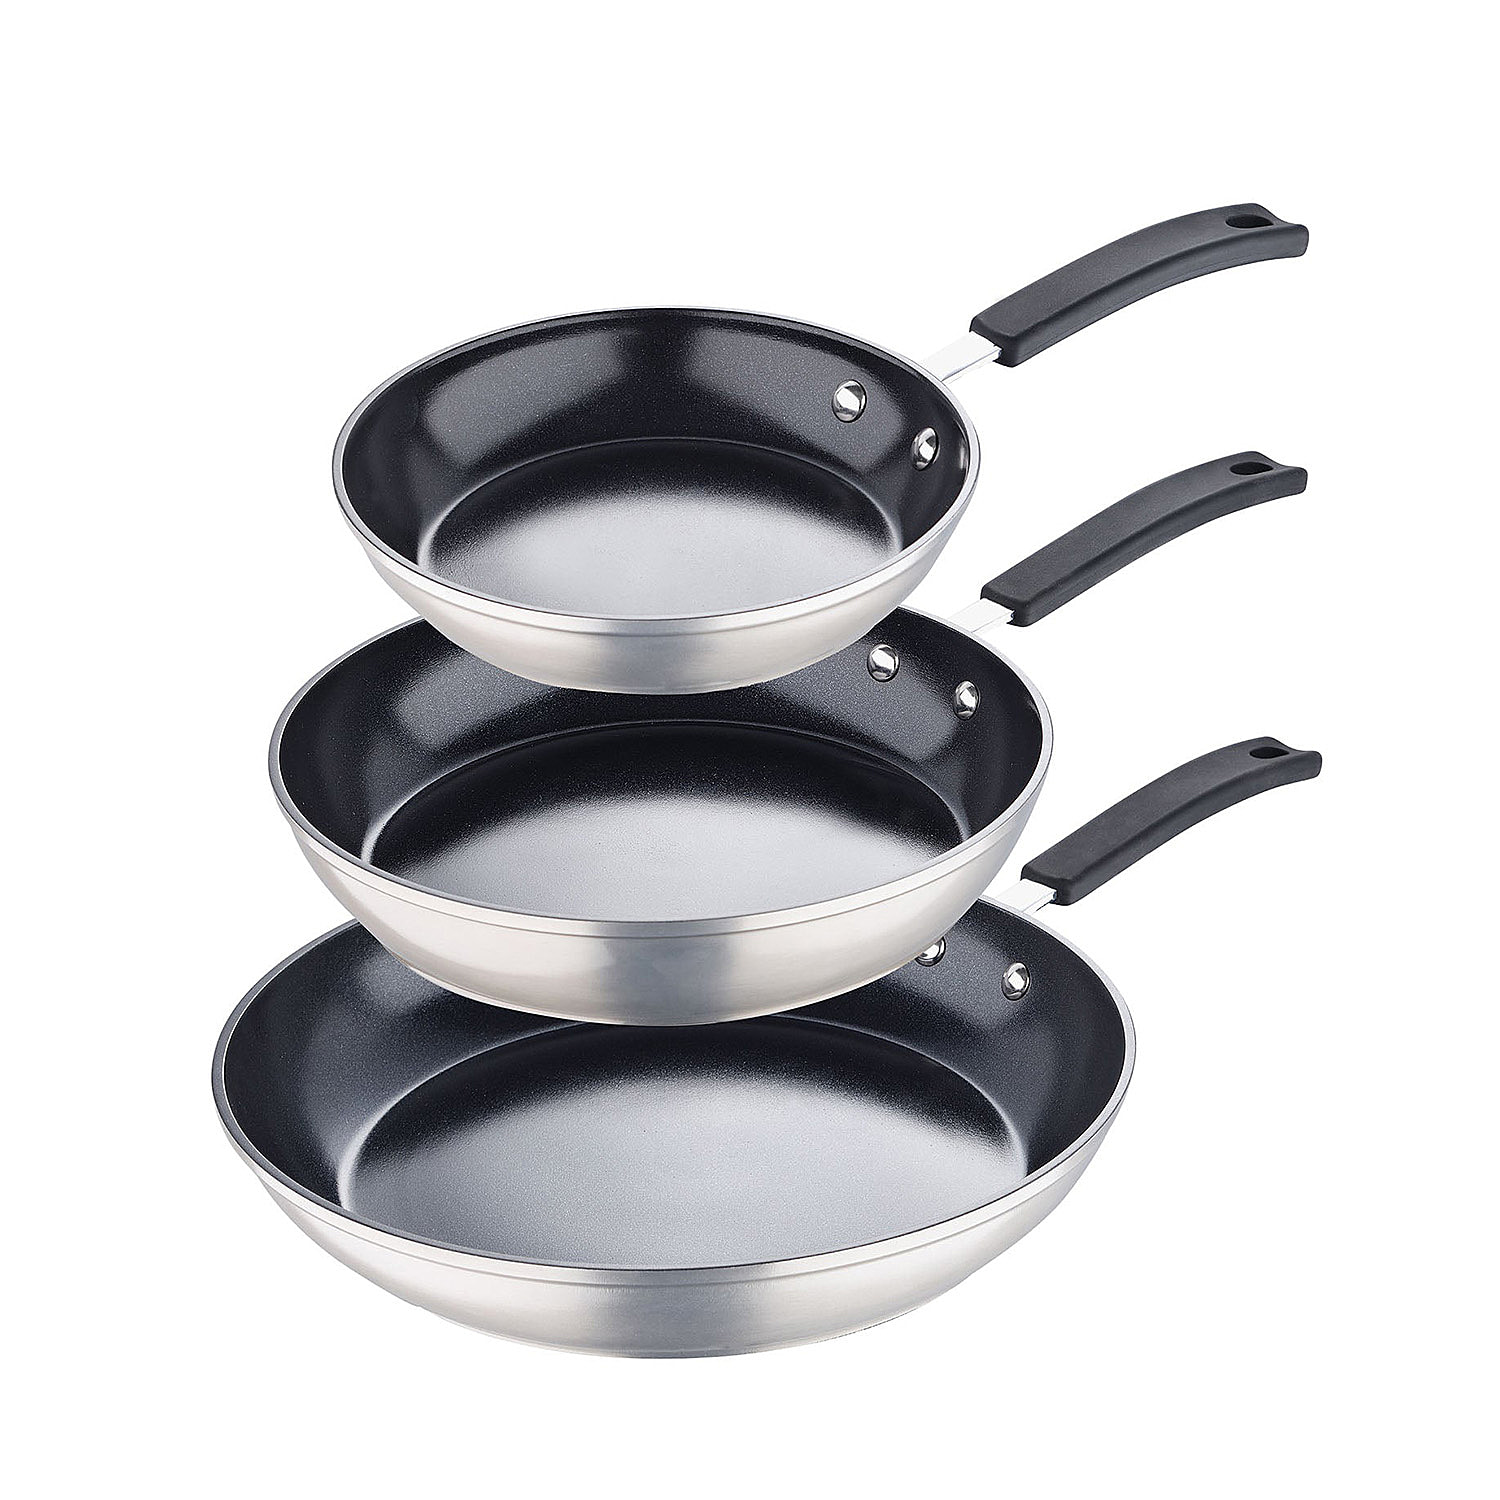 Fry-Pan-and-Skillet-Size-26x20x30-cm-Silver-Black